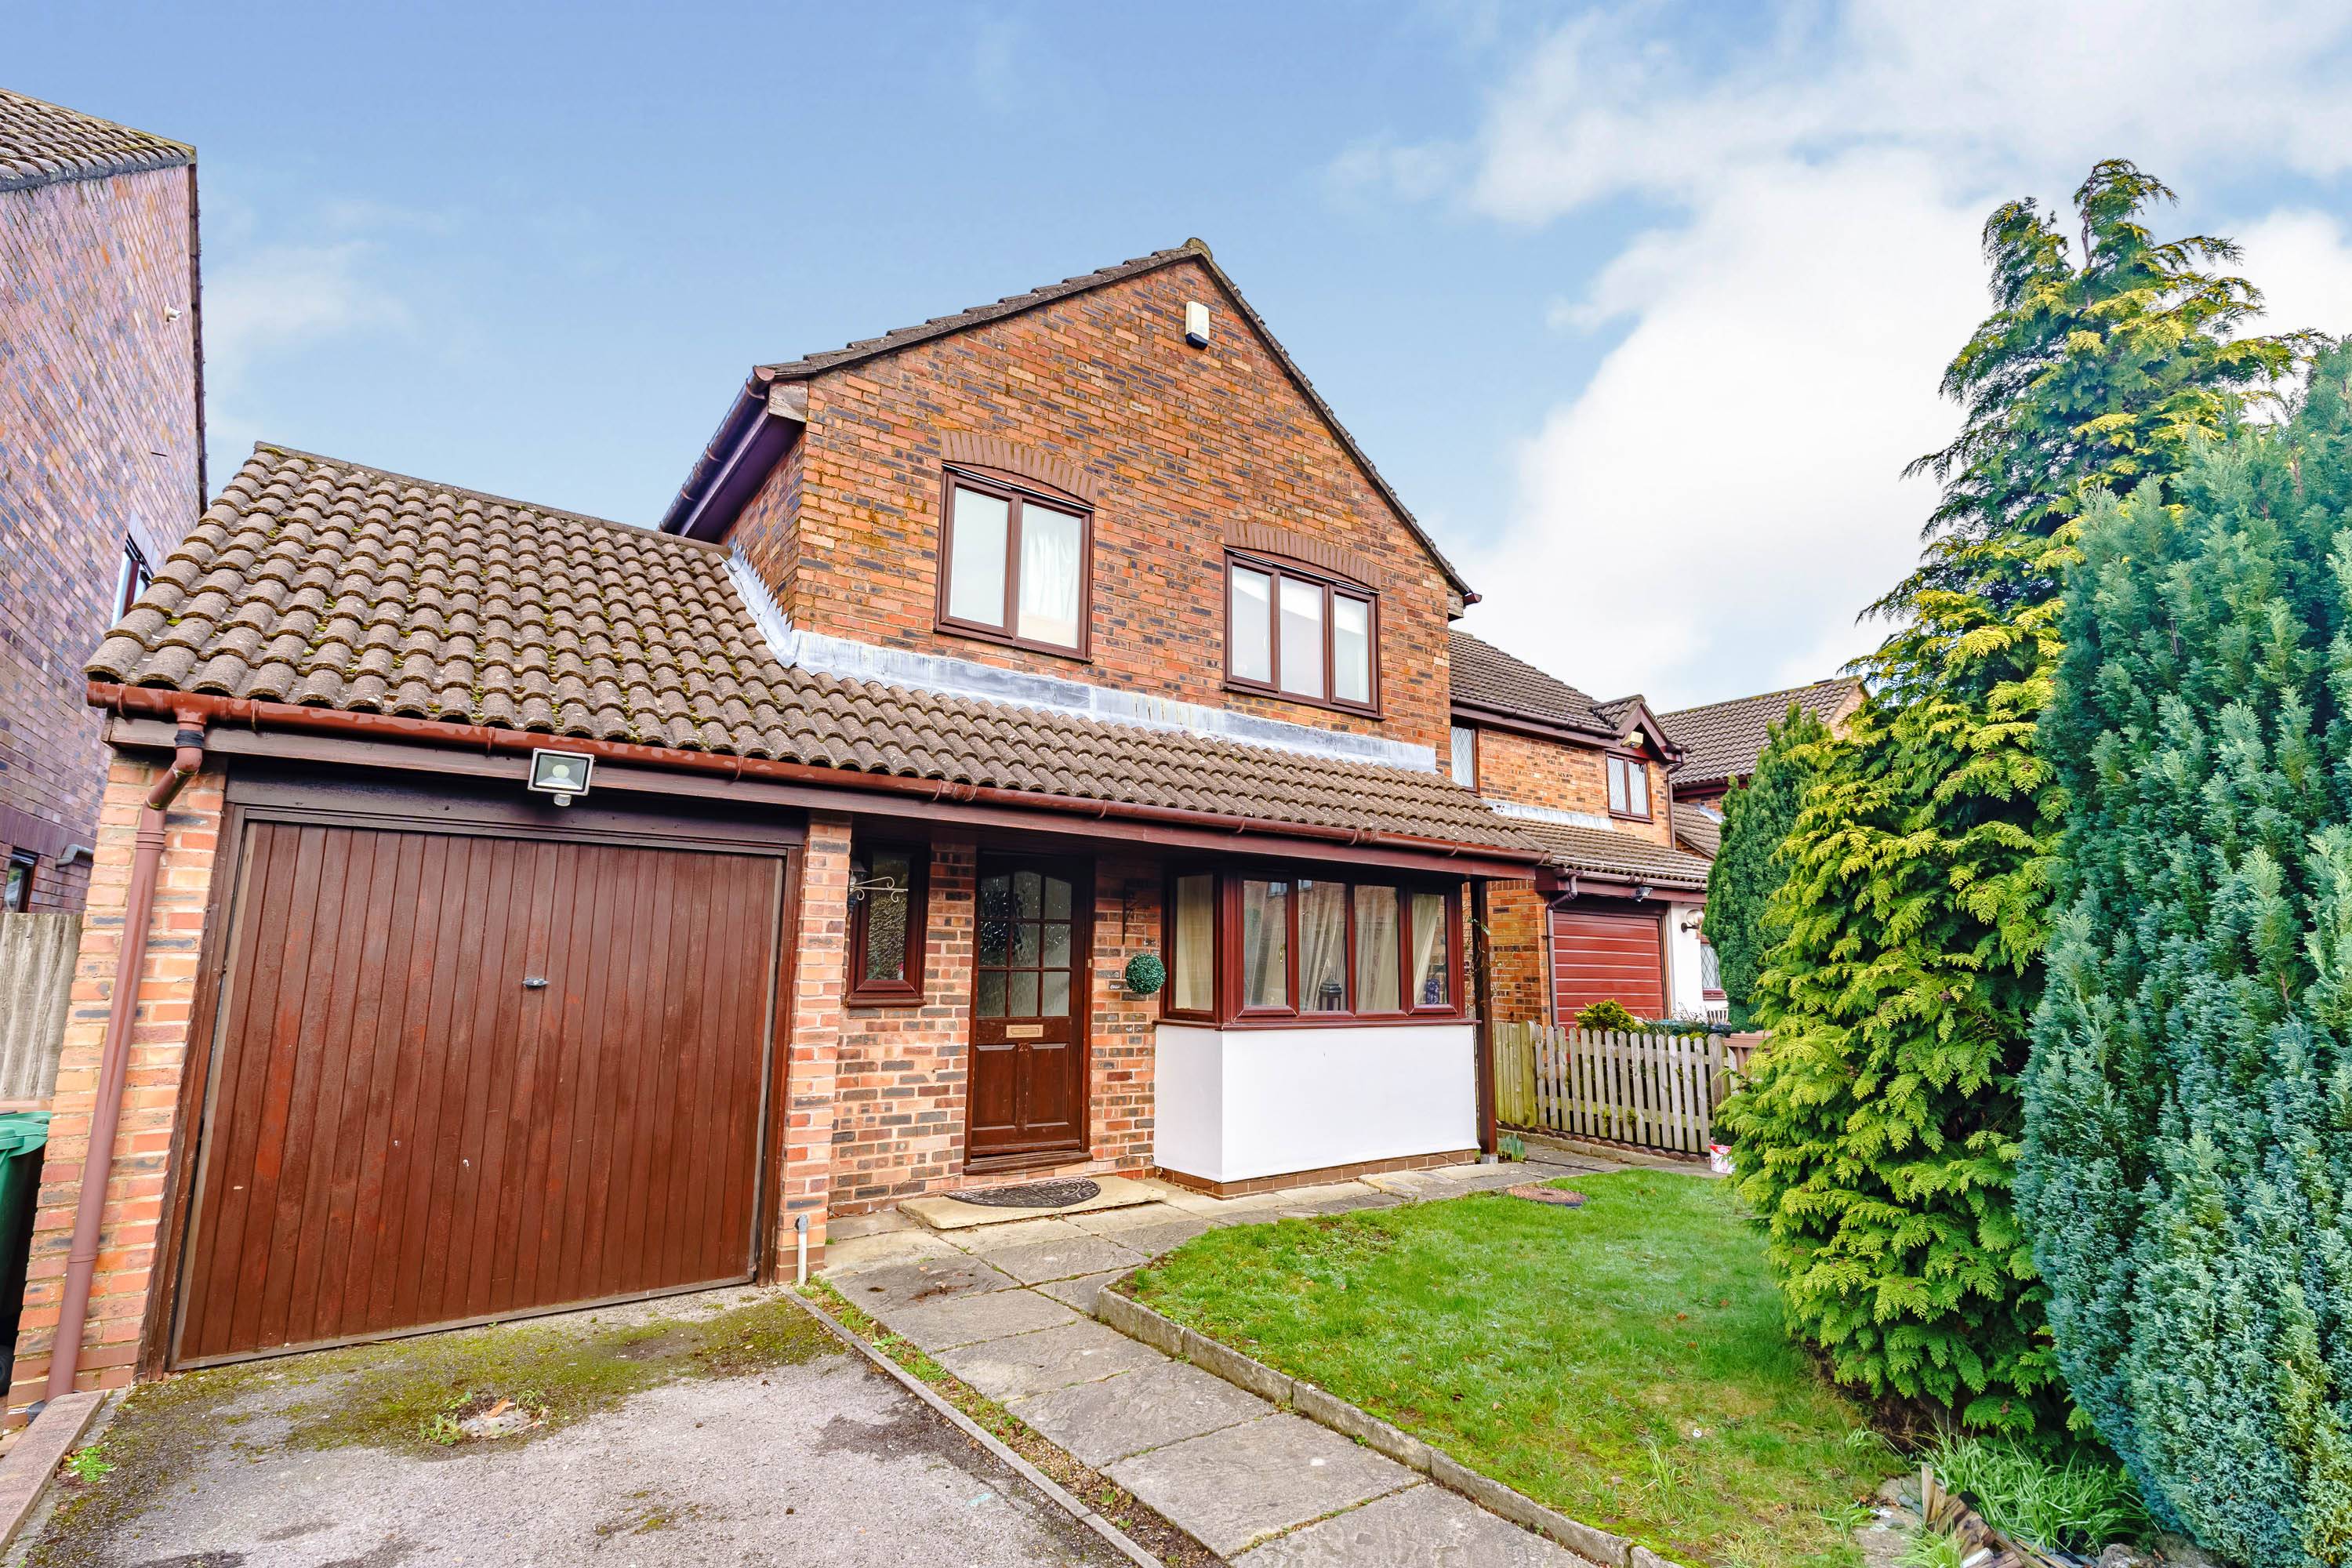 Detached 4 Bedroom Family Home